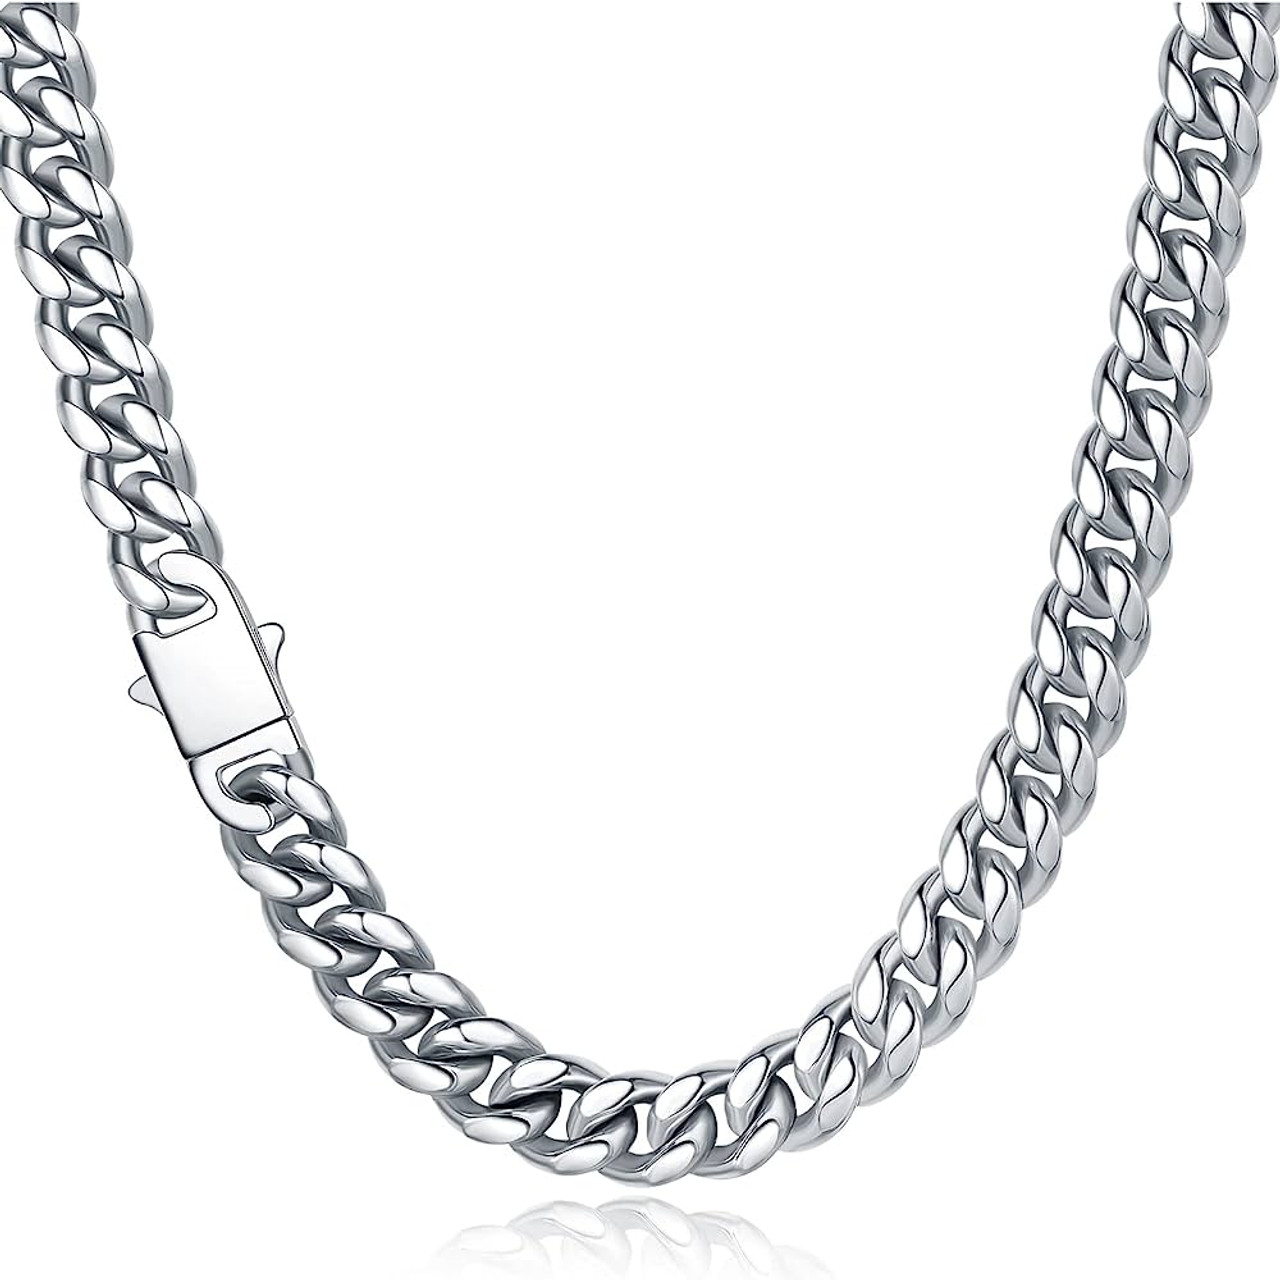 Rhodium Plated Sterling Silver Miami Cuban Bracelet / Chain with